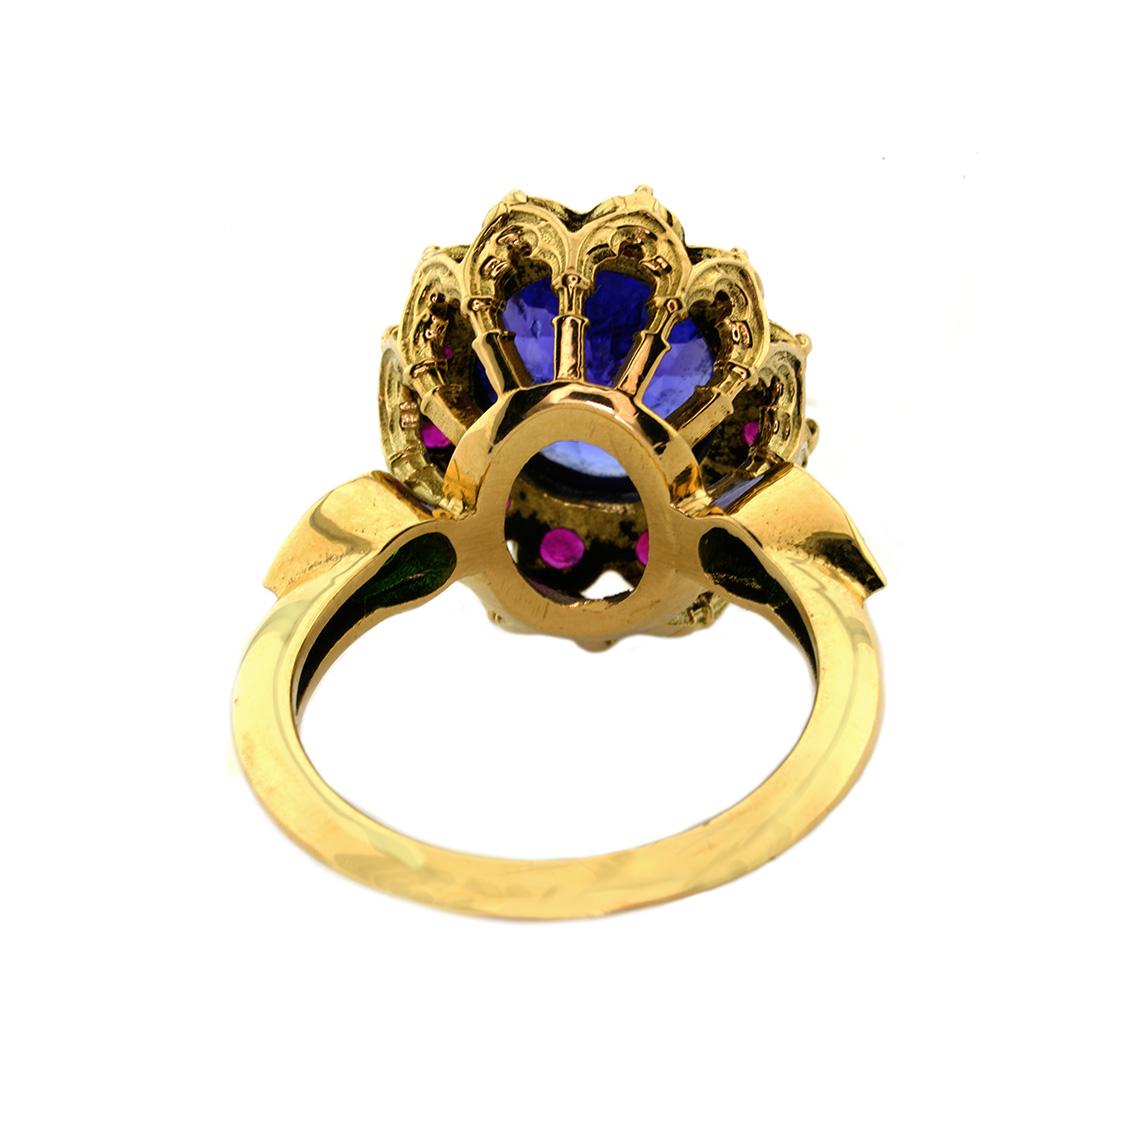 The Efflorescence Ring is an outstanding piece, reminiscent of a flourishing bloom it is truly exquisite. This vibrant ring takes the wearer on a journey to a secret garden where precious jewels create rare and unusual blossoms.

Handmade in 18kt